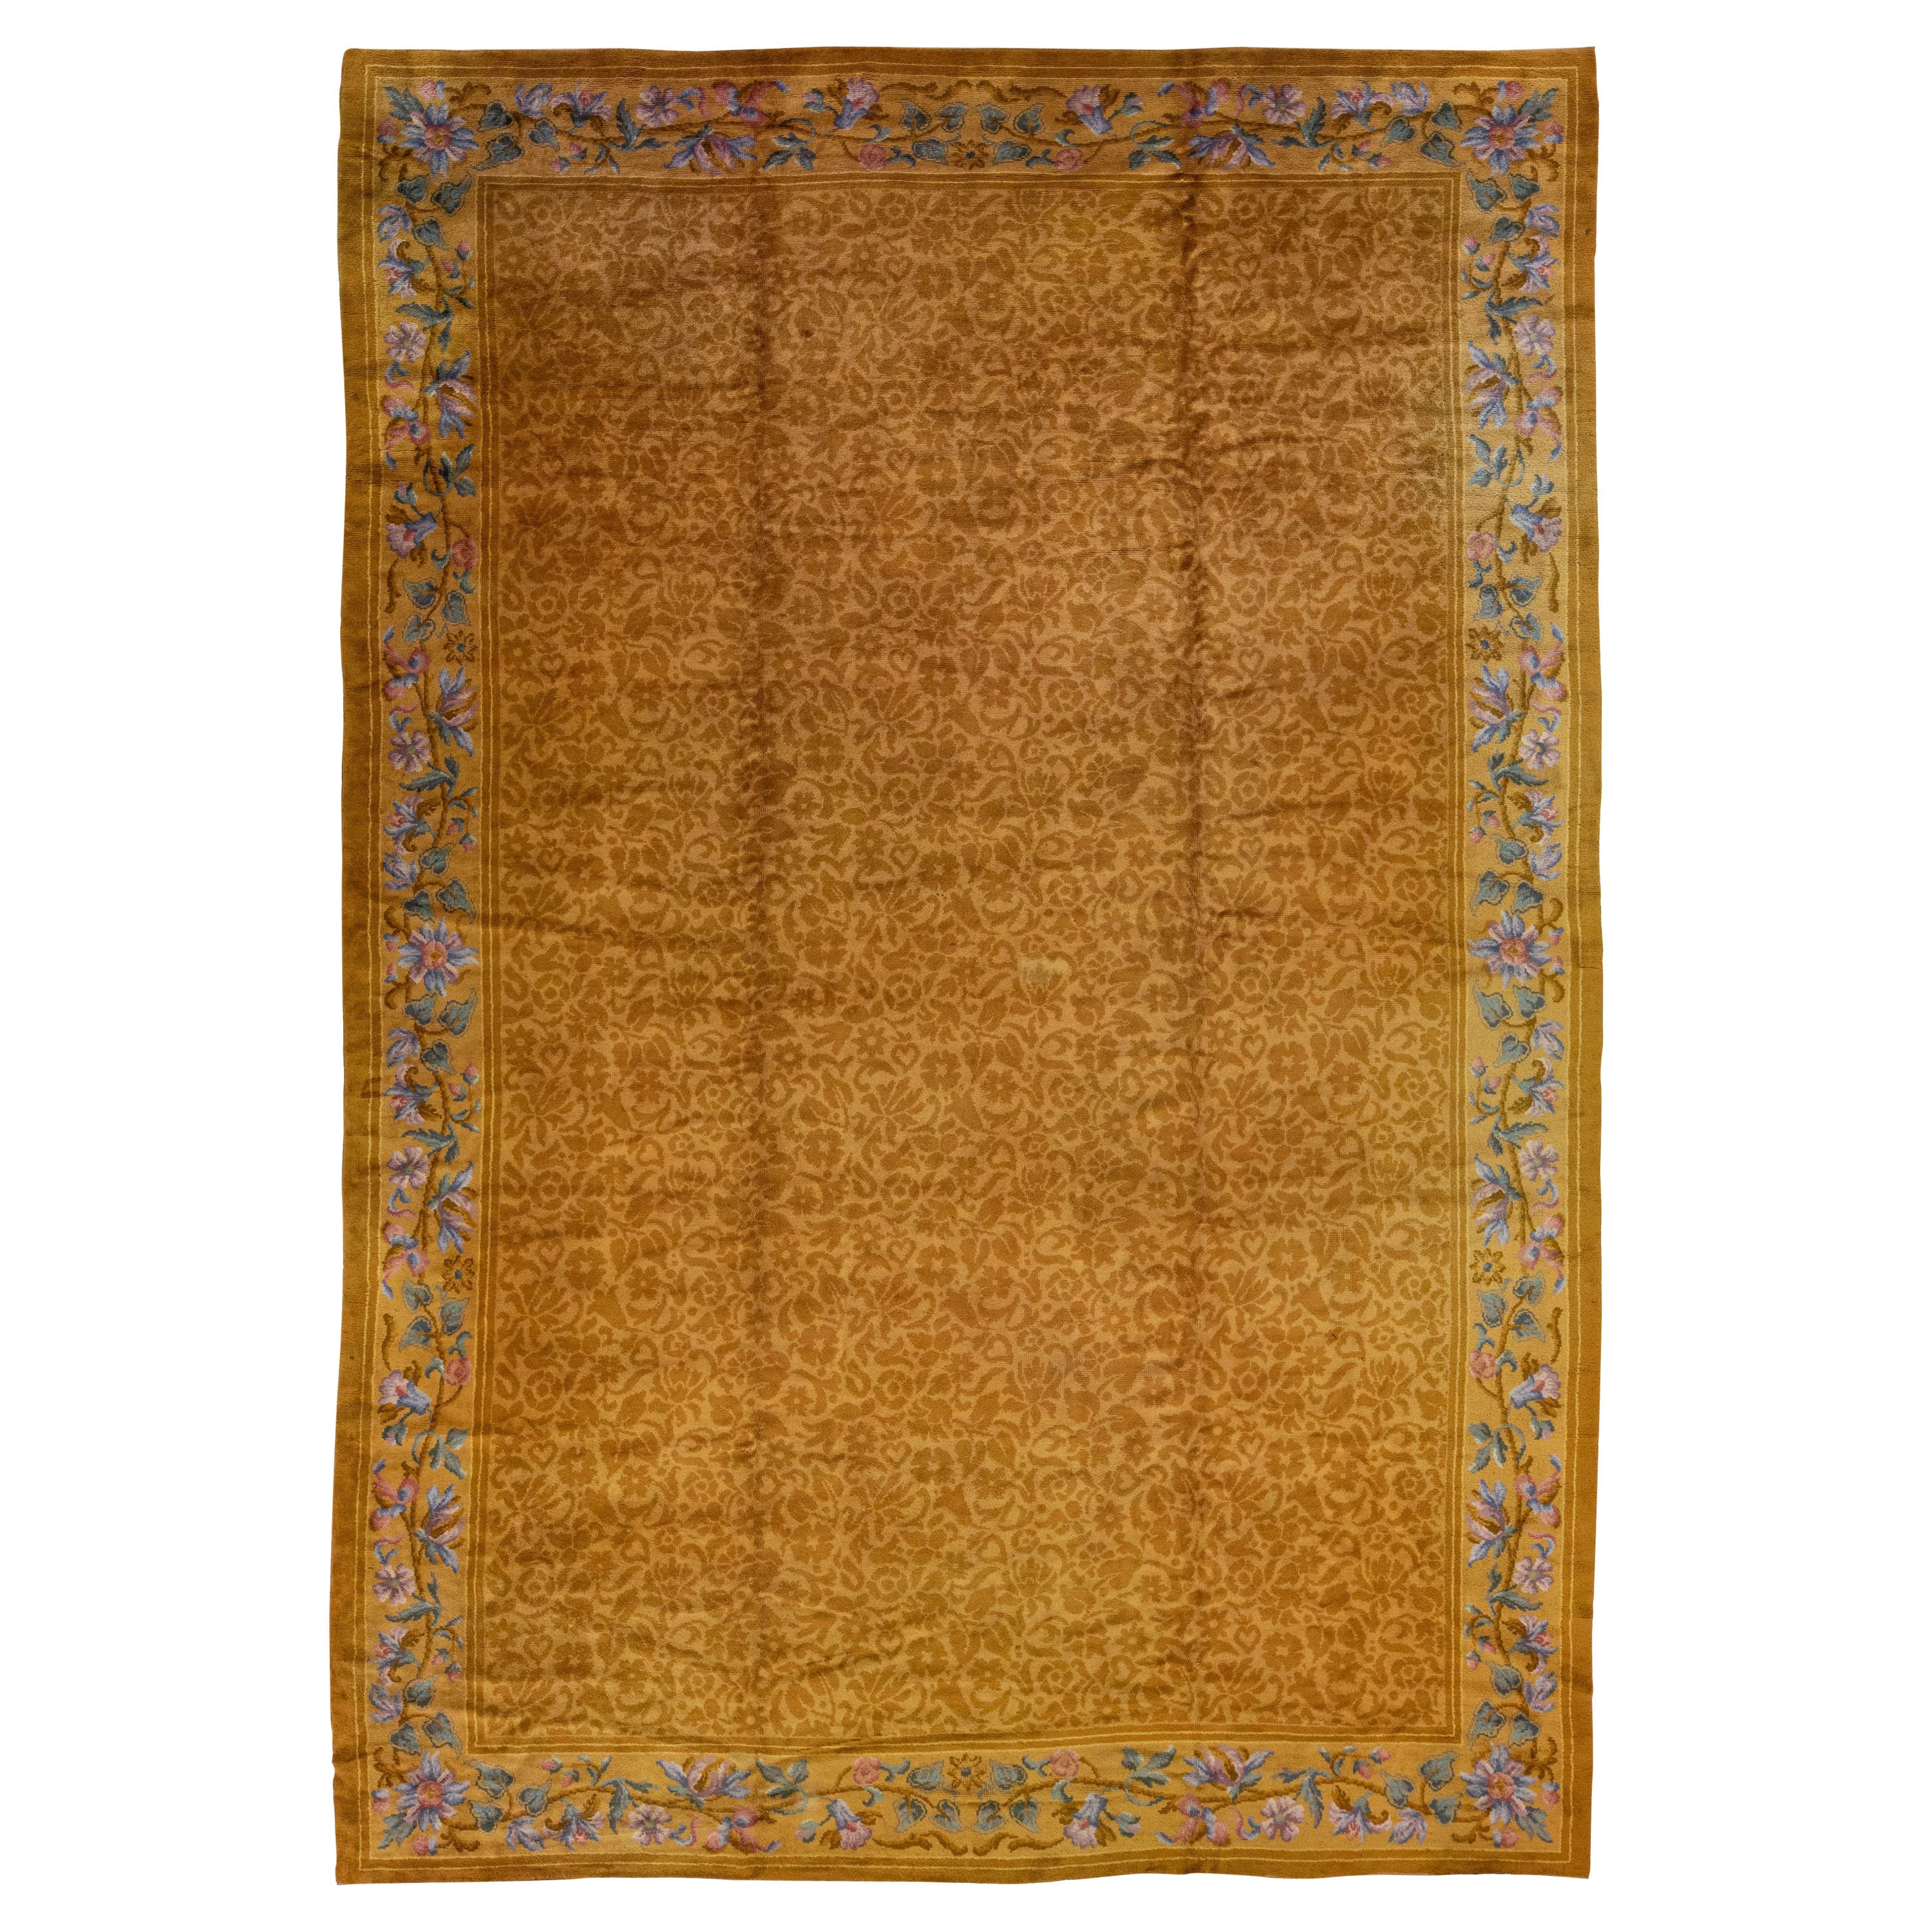 Antique Savonnerie Handmade Golderod Wool Rug with Allover Floral Motif For Sale